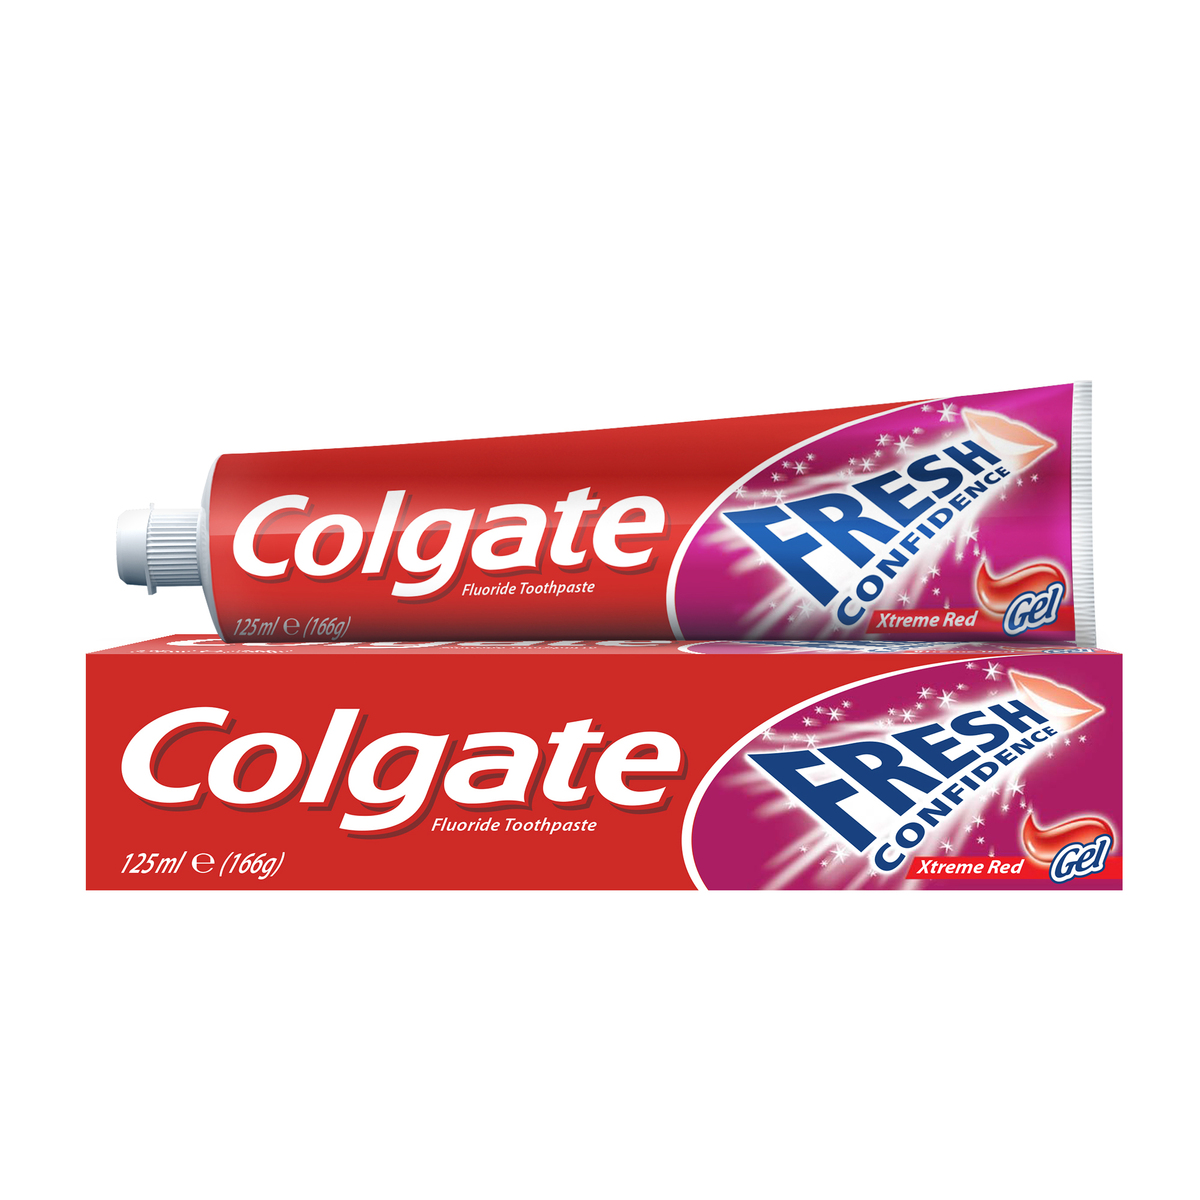 Detail Colgate Toothpaste Images Nomer 56